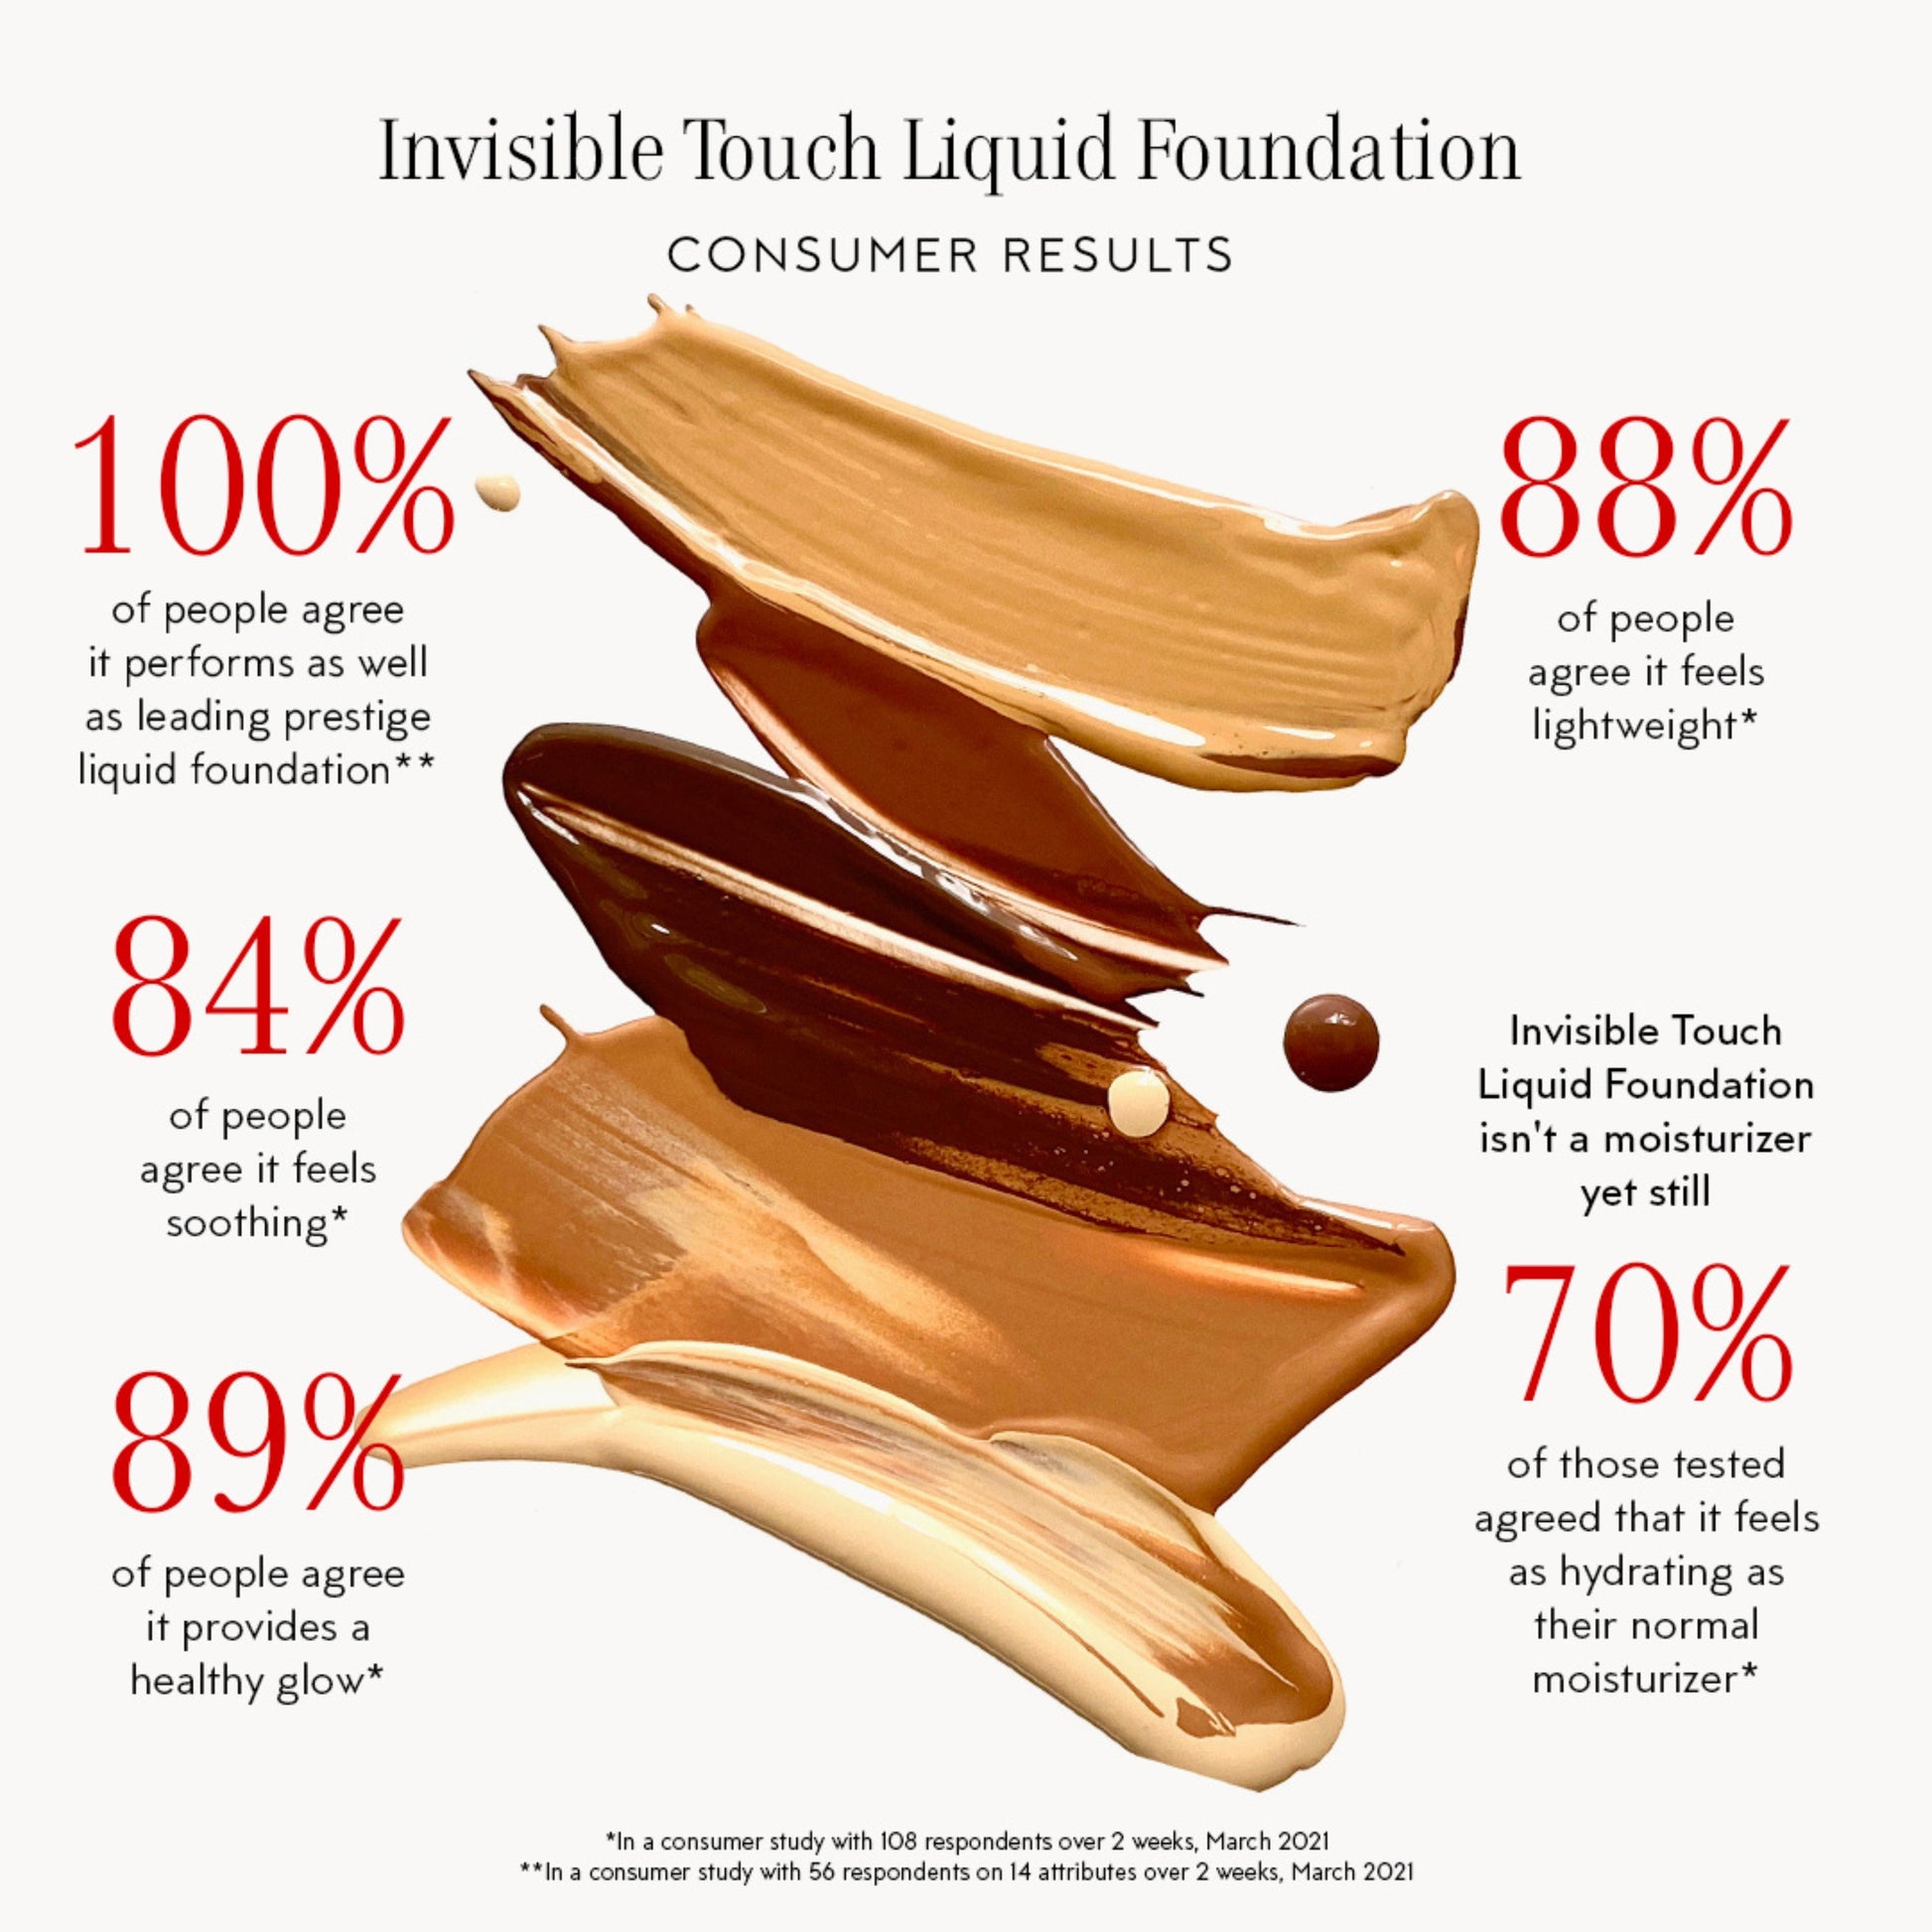 wipes of liquid foundation. text reads: 100% of people agree it performs as well as leading prestige liquid foundation**. 88% agree its lightweight*. 84% agree its soothing*. 89% agree it provides a healthy glow*. invisible touch liquid foundation isn’t a moisturizer and yet 70% agreed that it feels as hydrating as their normal moisturizer*. * in a consumer study with 108 respondents over 2 weeks, march 2021. ** in a consumer study with 56 respondents on 14 attributes over 2 weeks, march 2021